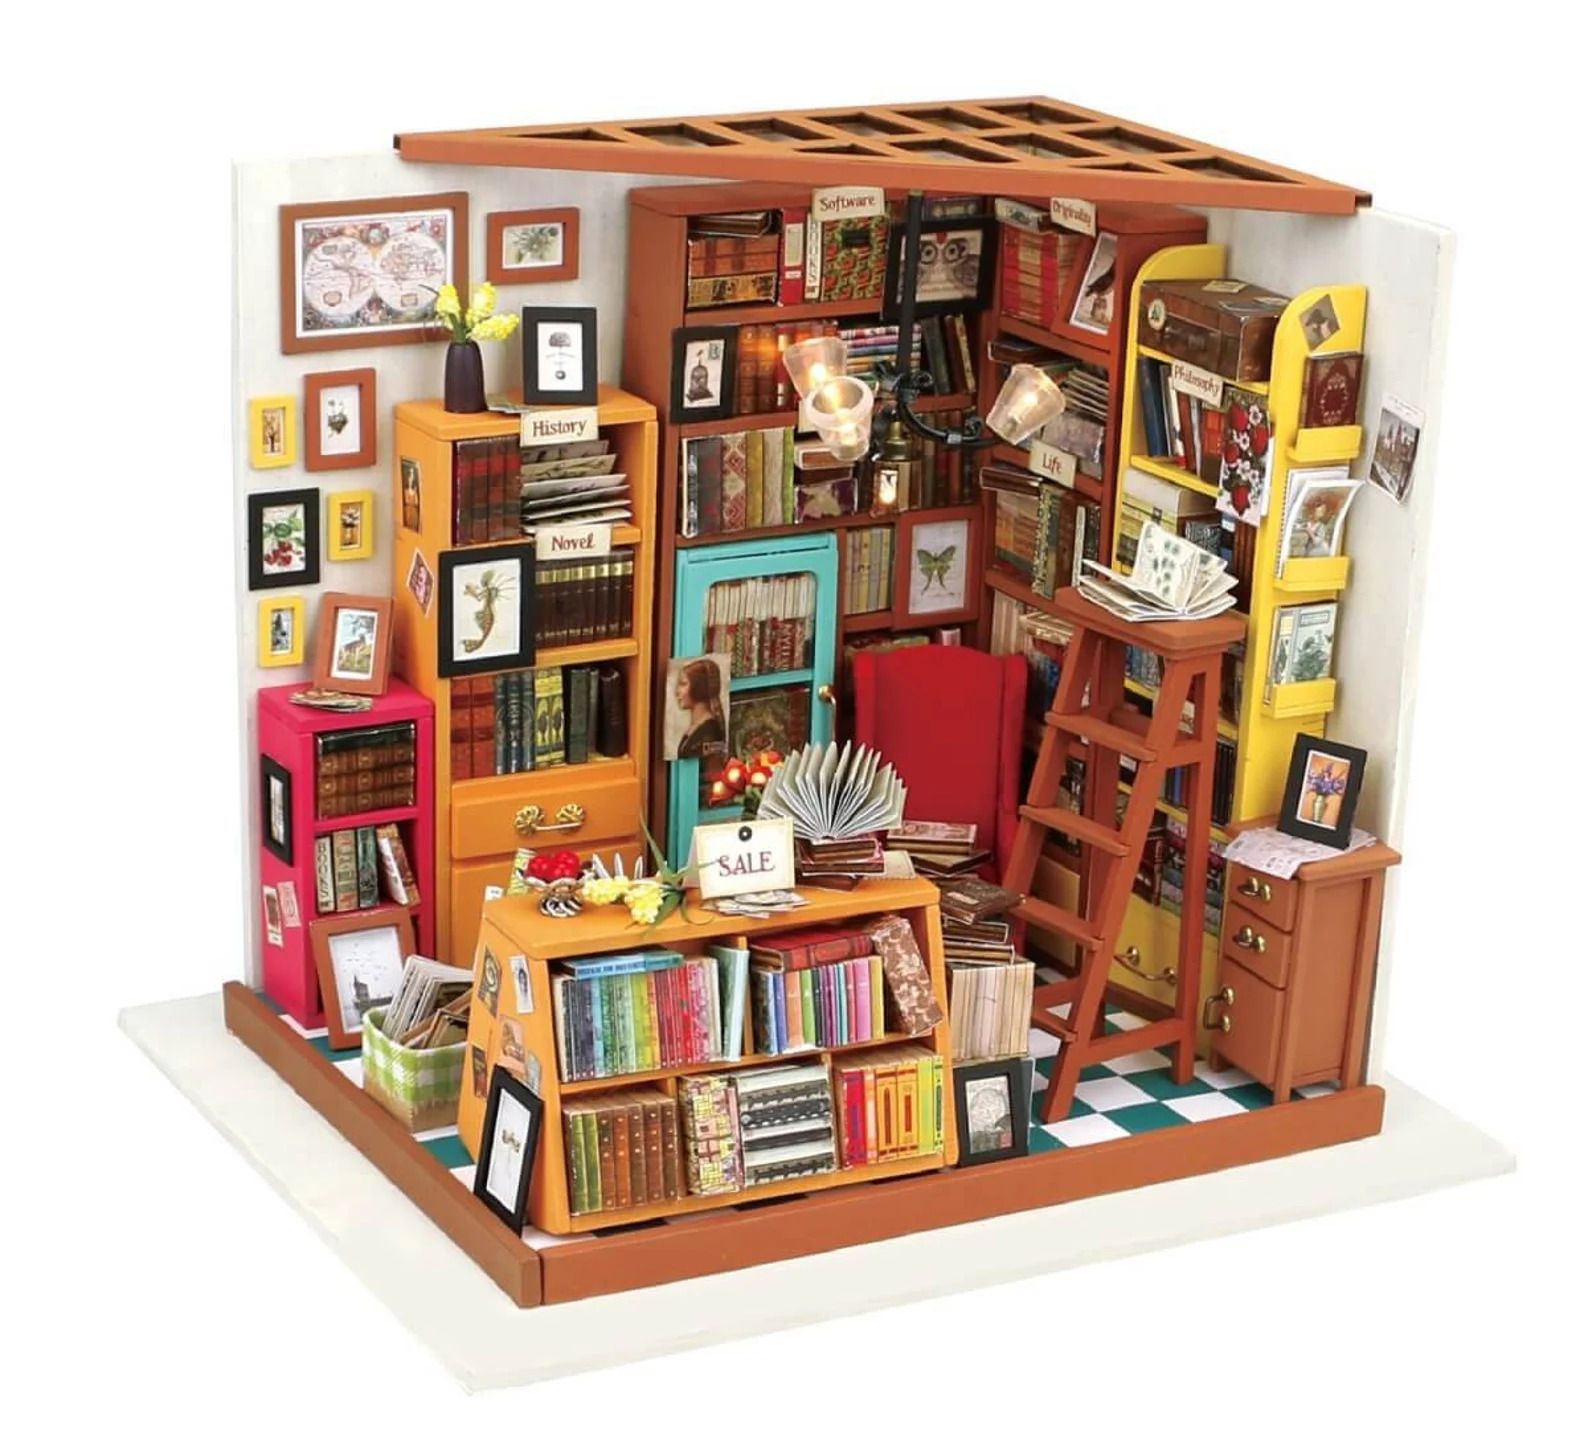 Image of DIY Miniature Model Library Bookstore Kit by HandsCraftUS from Etsy